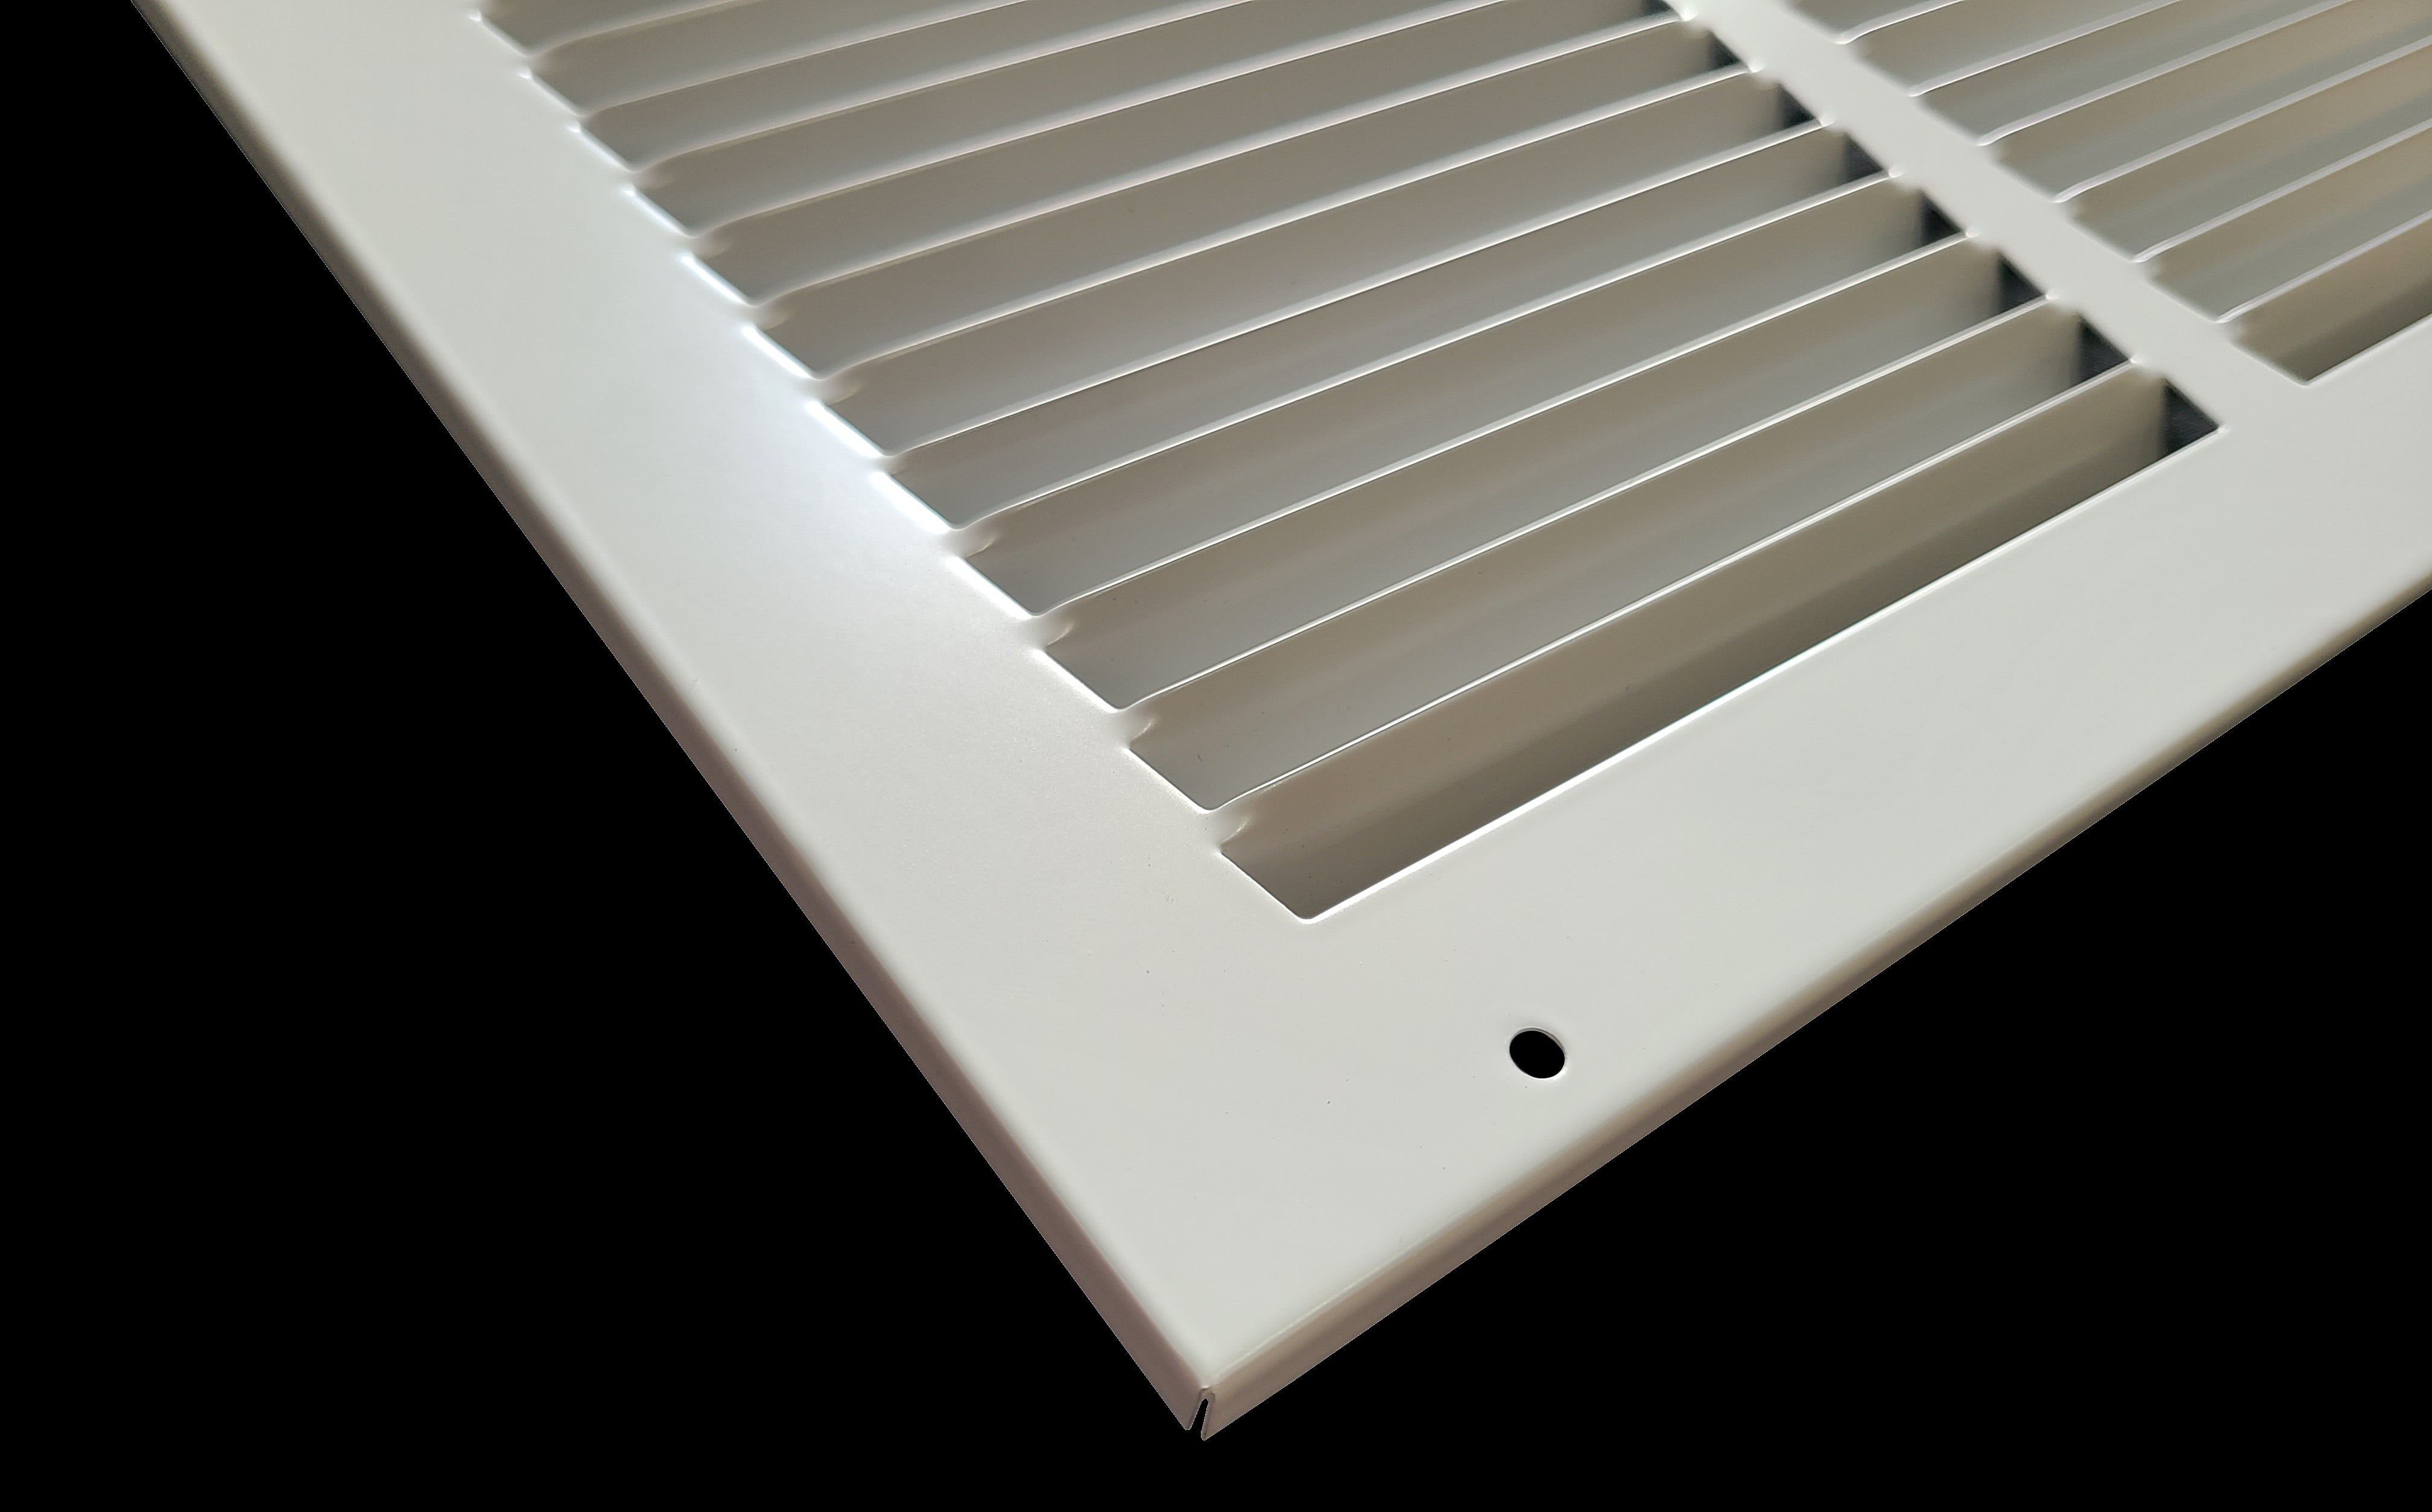 16" X 20" Duct Opening | HD Steel Return Air Grille for Sidewall and Ceiling | Outer Dimensions: 17.75"W X 21.75"H